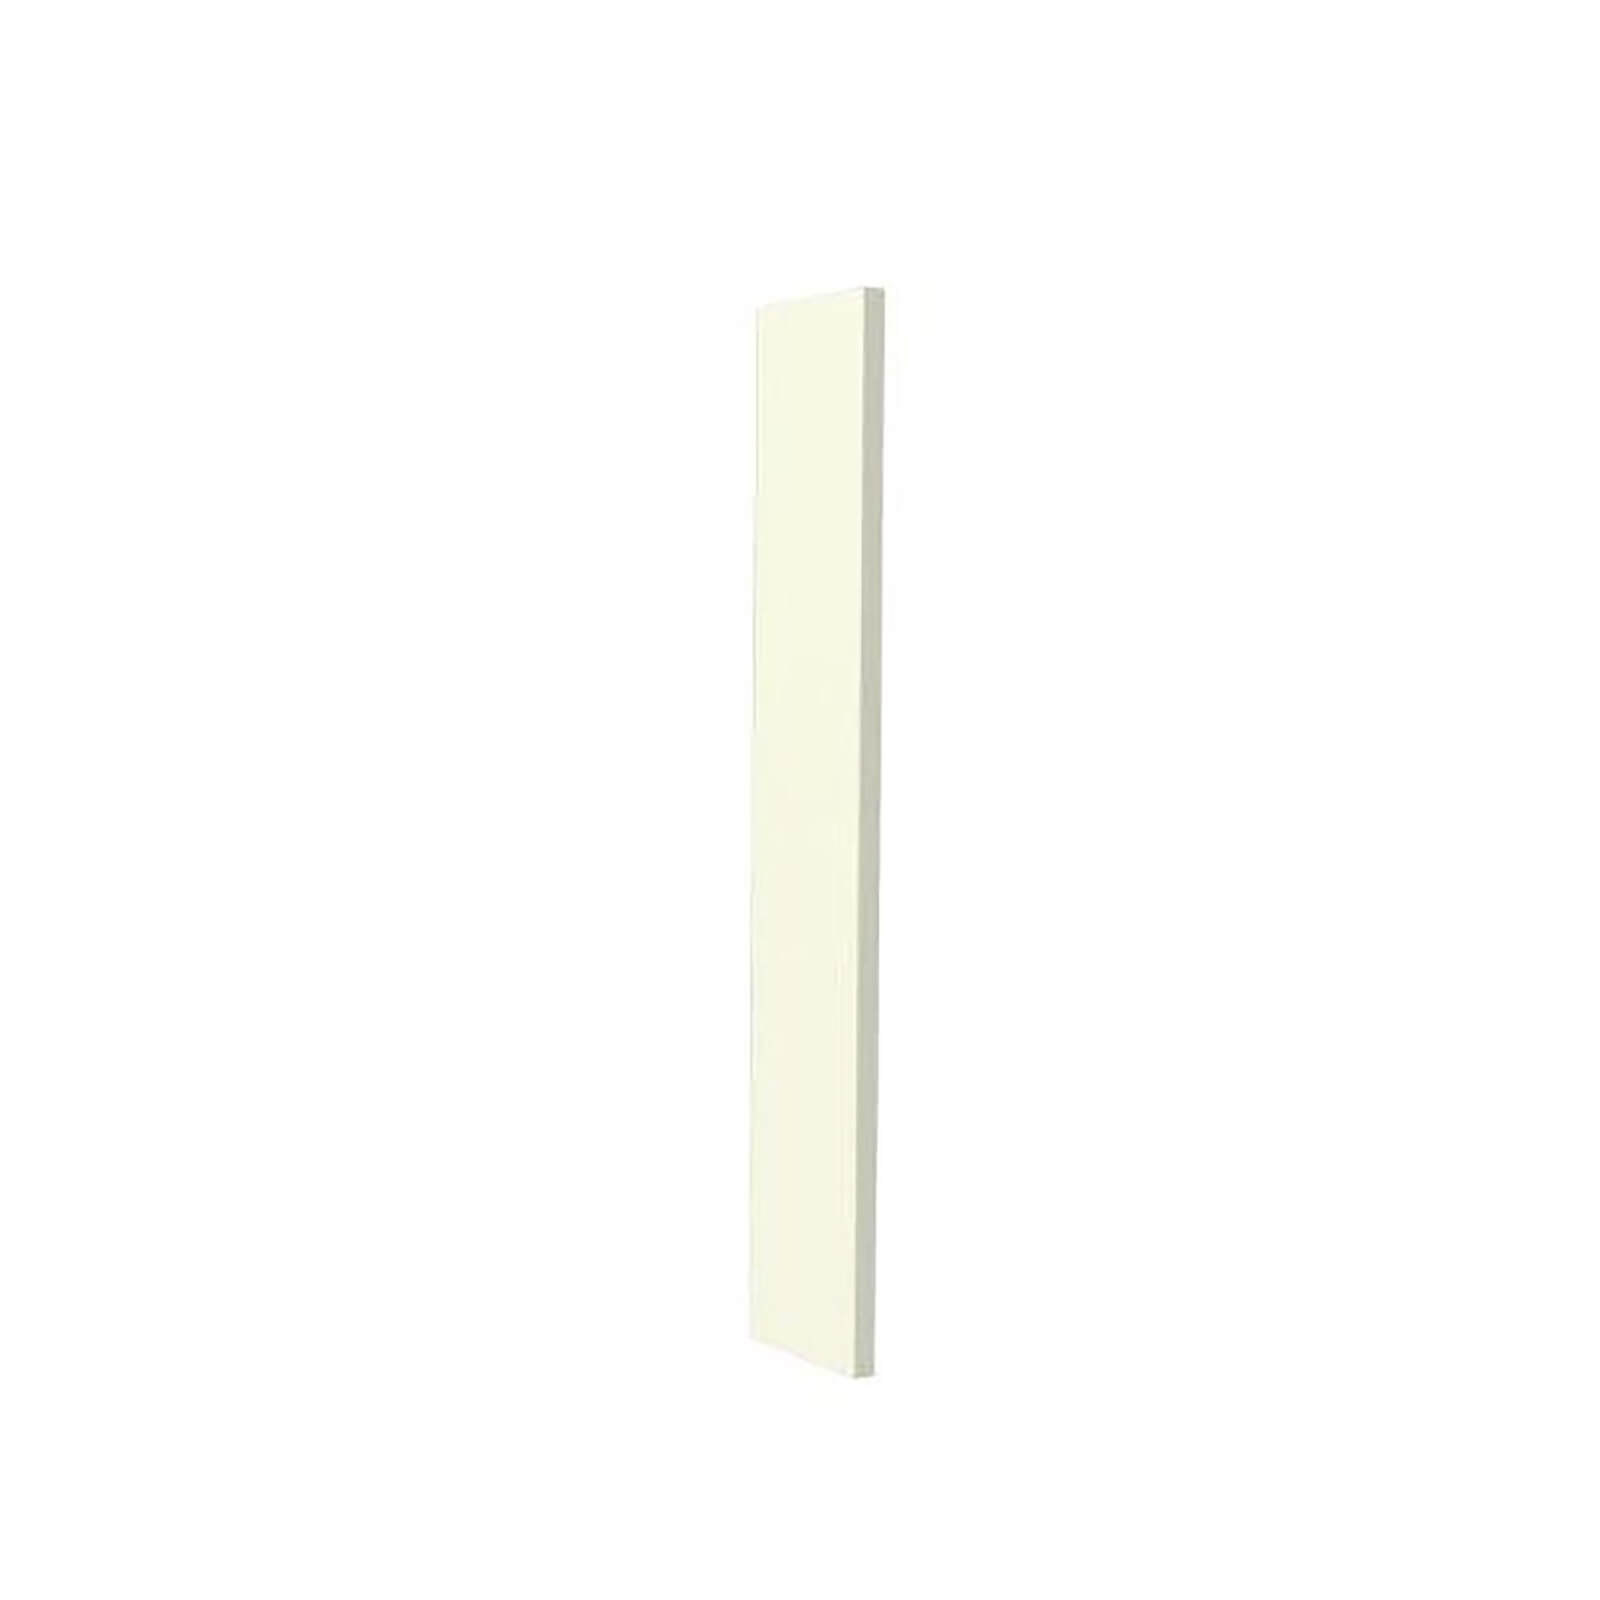 Photo of Country Shaker Light Cream Adjustable Corner Post And Filler